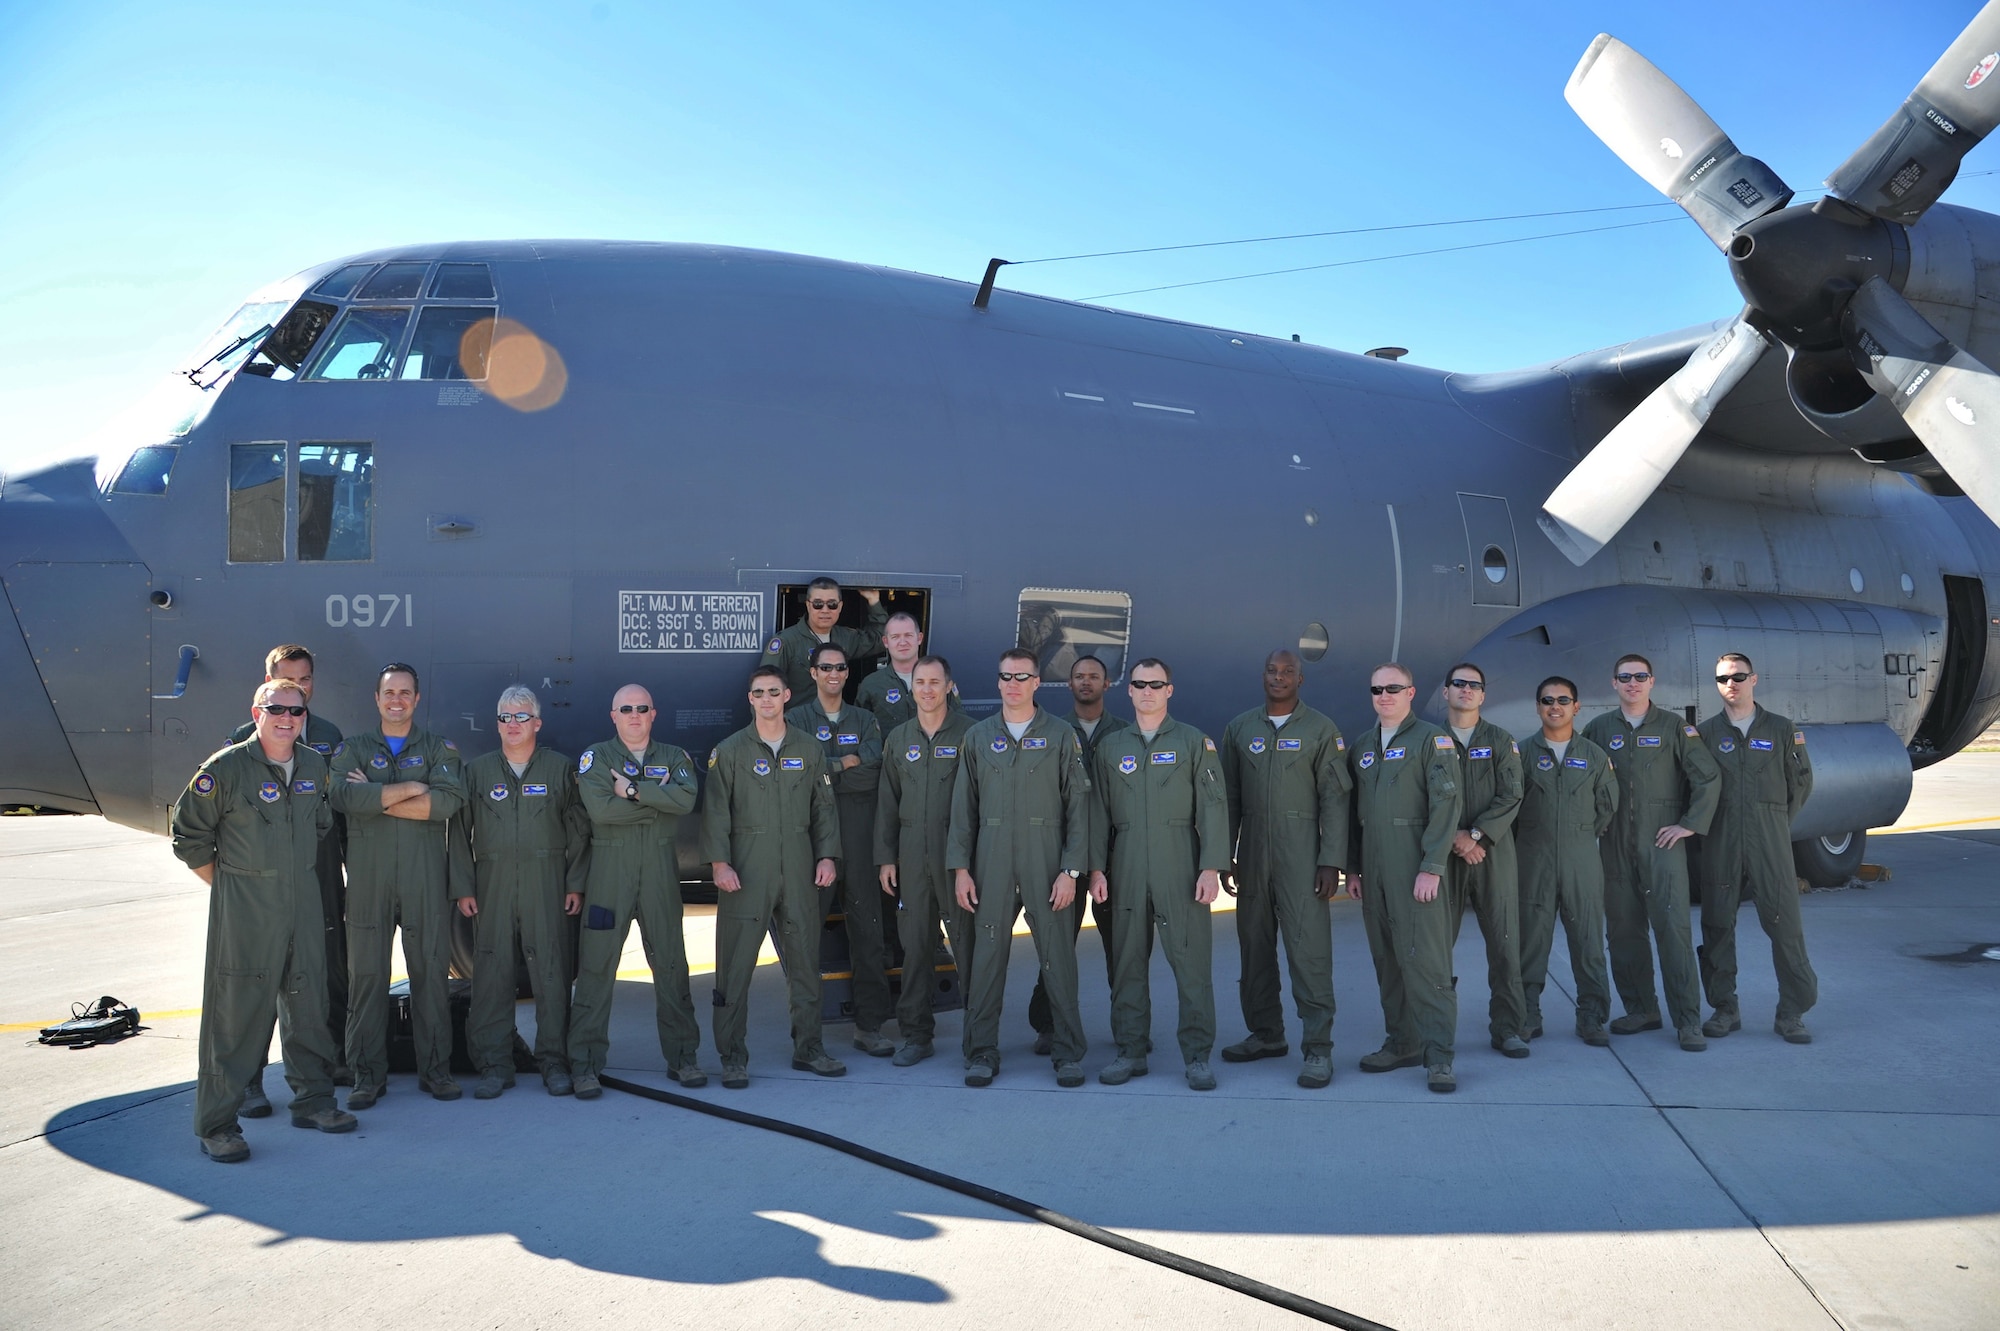 Crew members pose before one of the 550th Special Operations Squadron's last two remaining assigned MC-130Ps Combat Shadows as it sits on the flightline before its final flight at an informal ceremony Sept. 6.  The departure of the aircraft marks the end of a 25-year training curriculum at Kirtland. (Photo by Ken Moore)